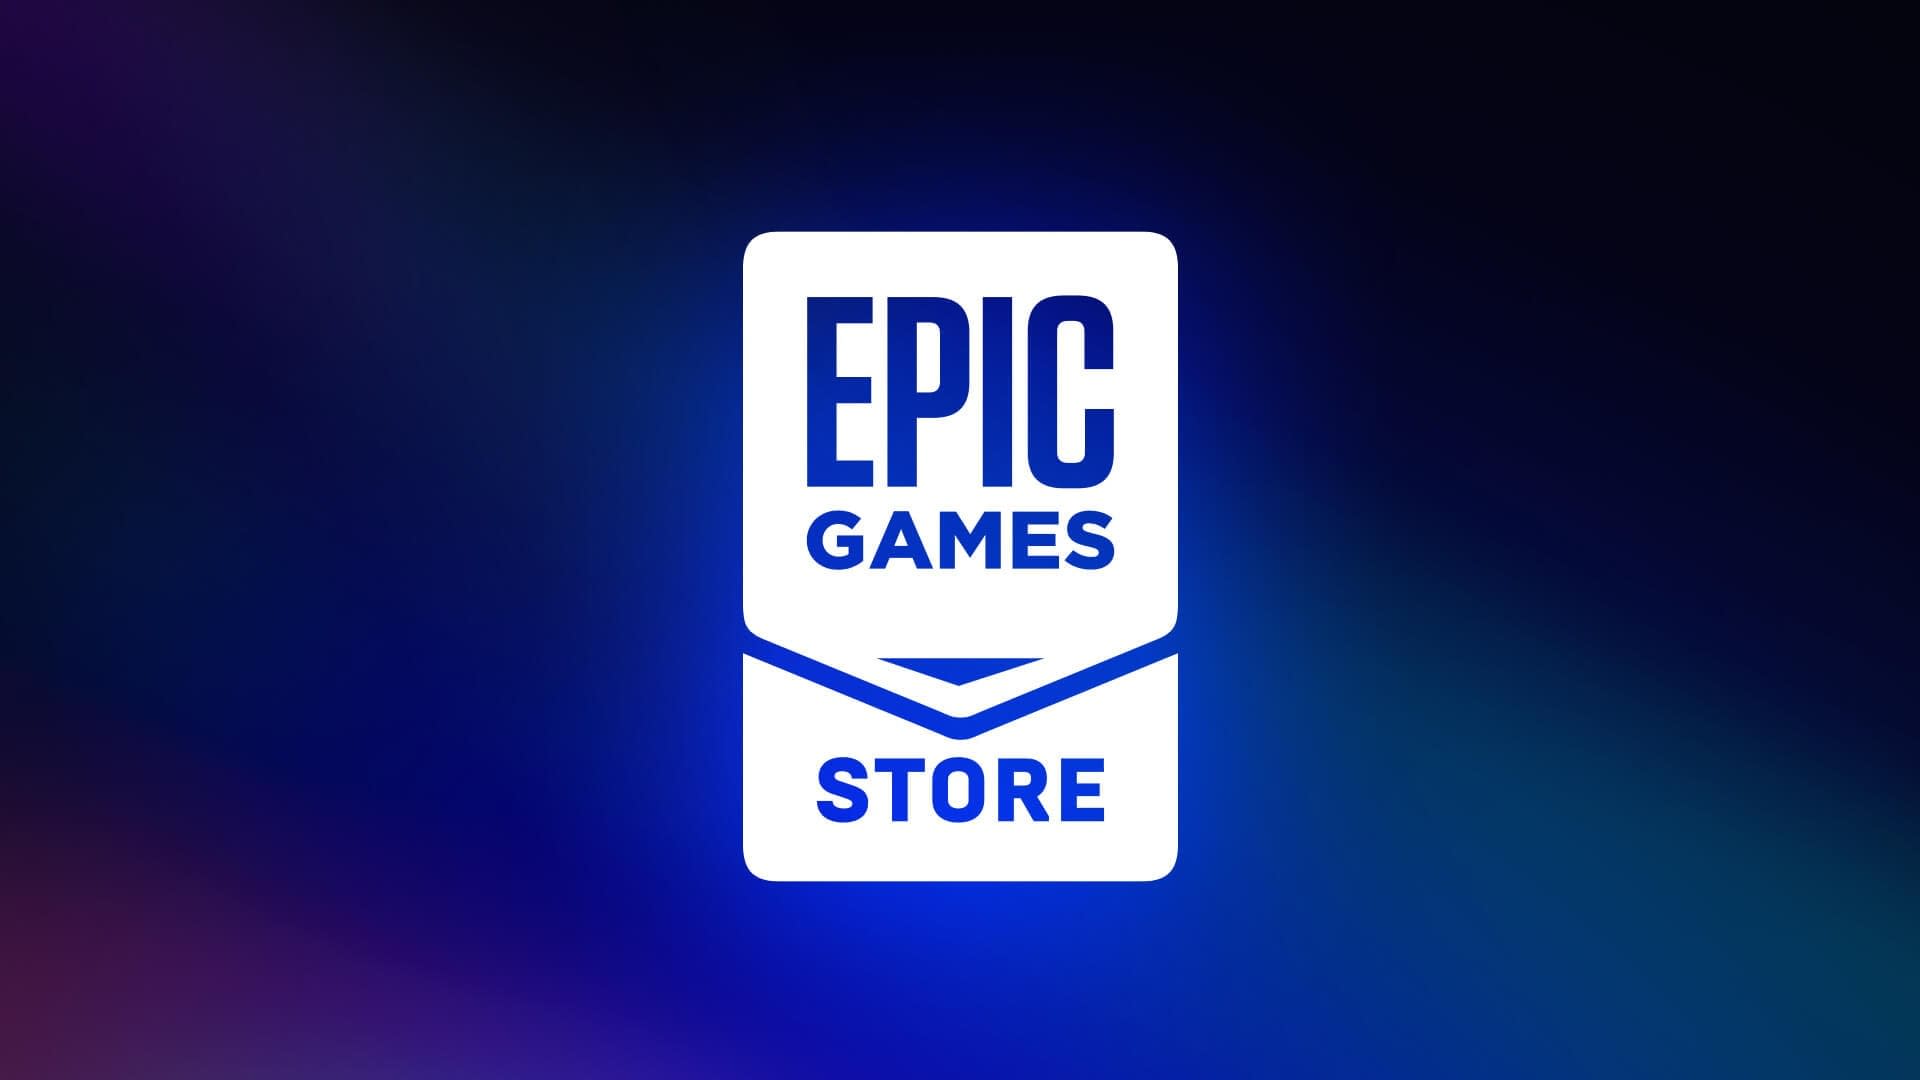 Epic Games This Week is 368 Tl’s Game Free!